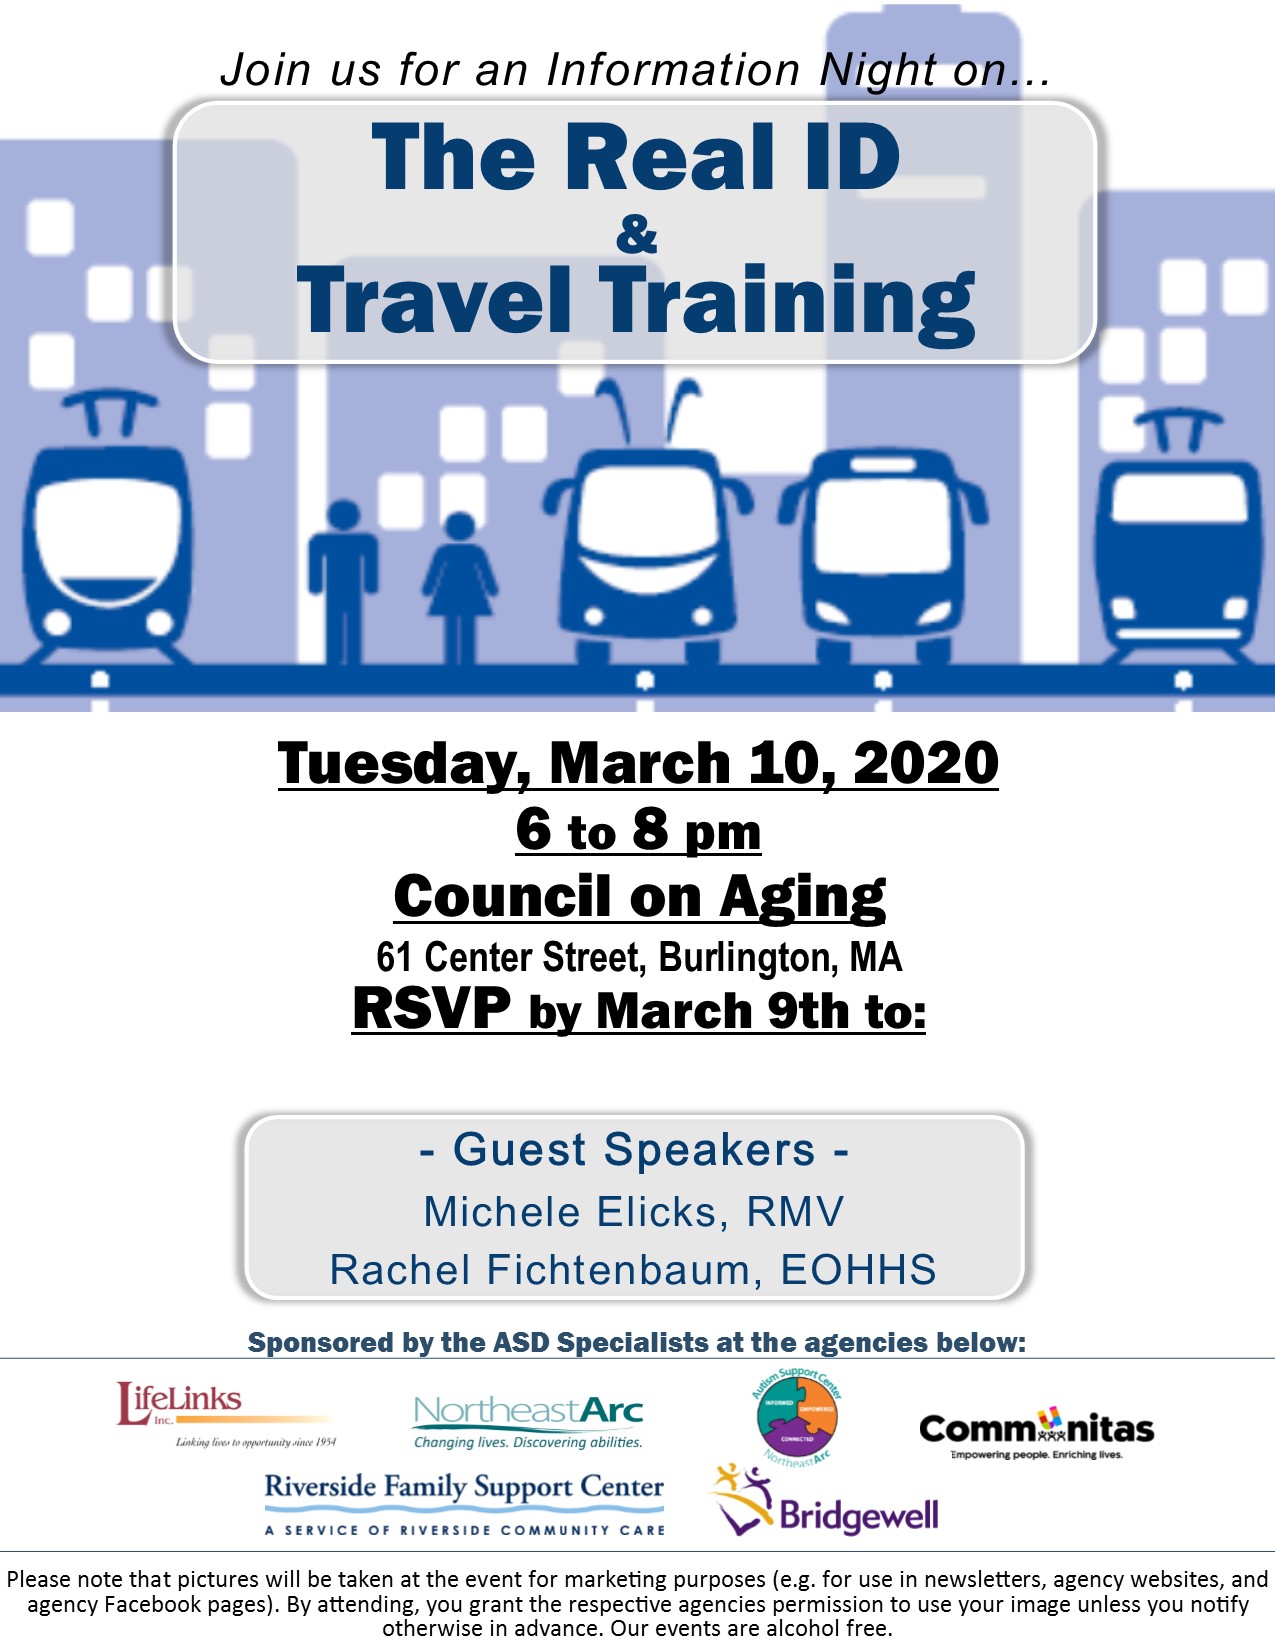 Flyer for The Real ID & Travel Training